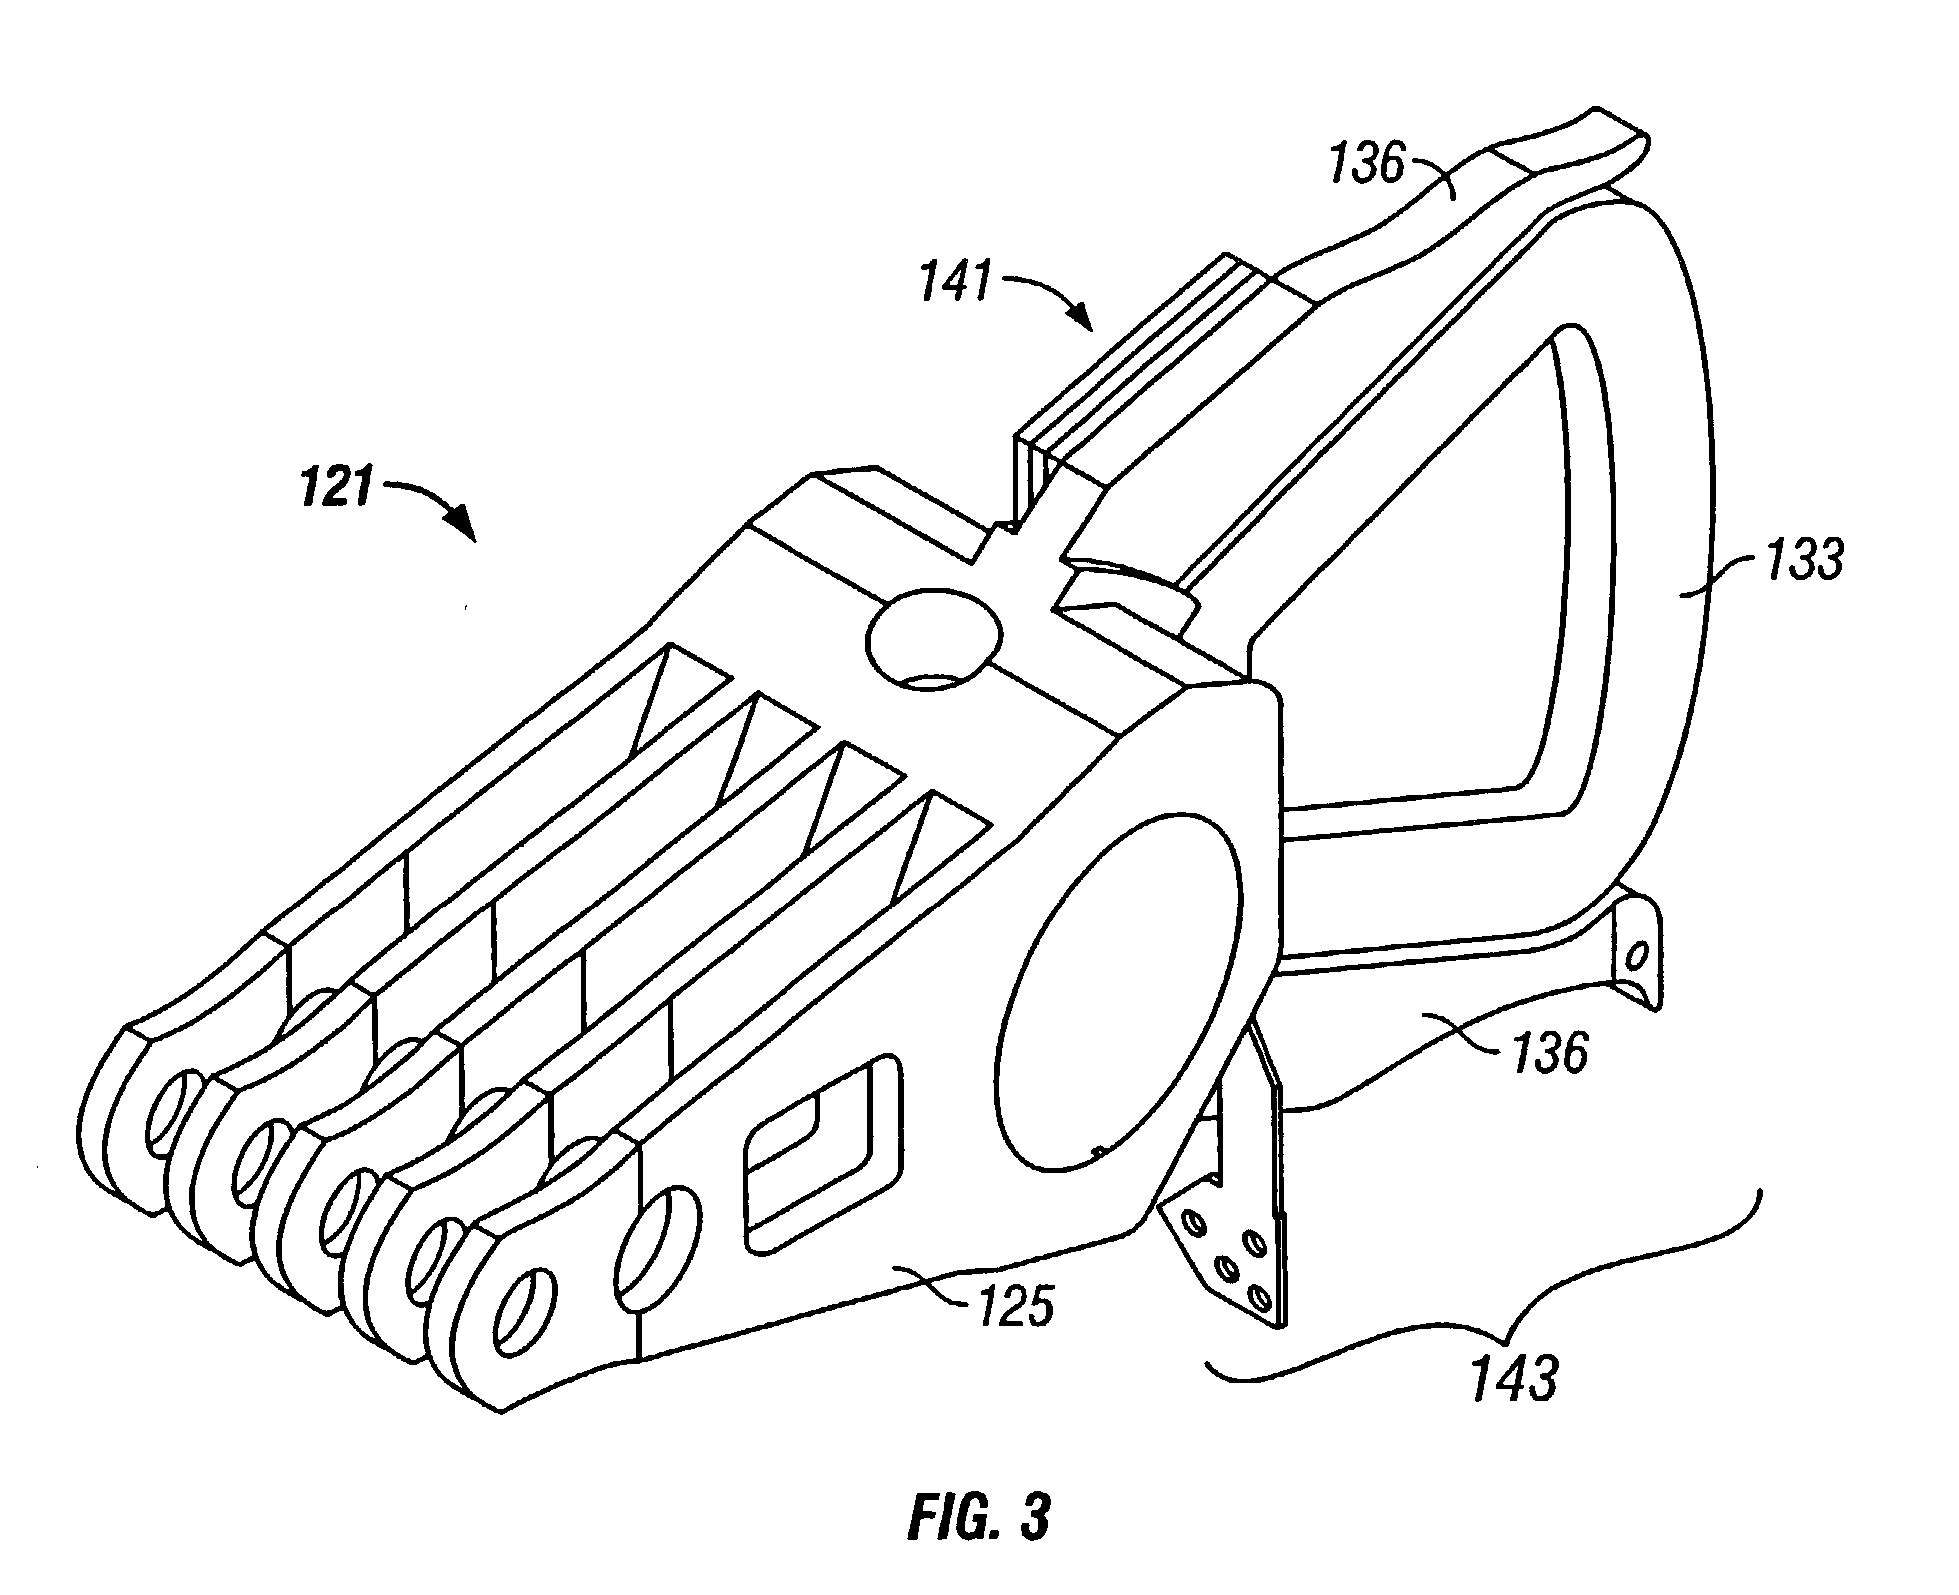 System and method of damping vibration on coil supports in high performance disk drives with rotary actuators